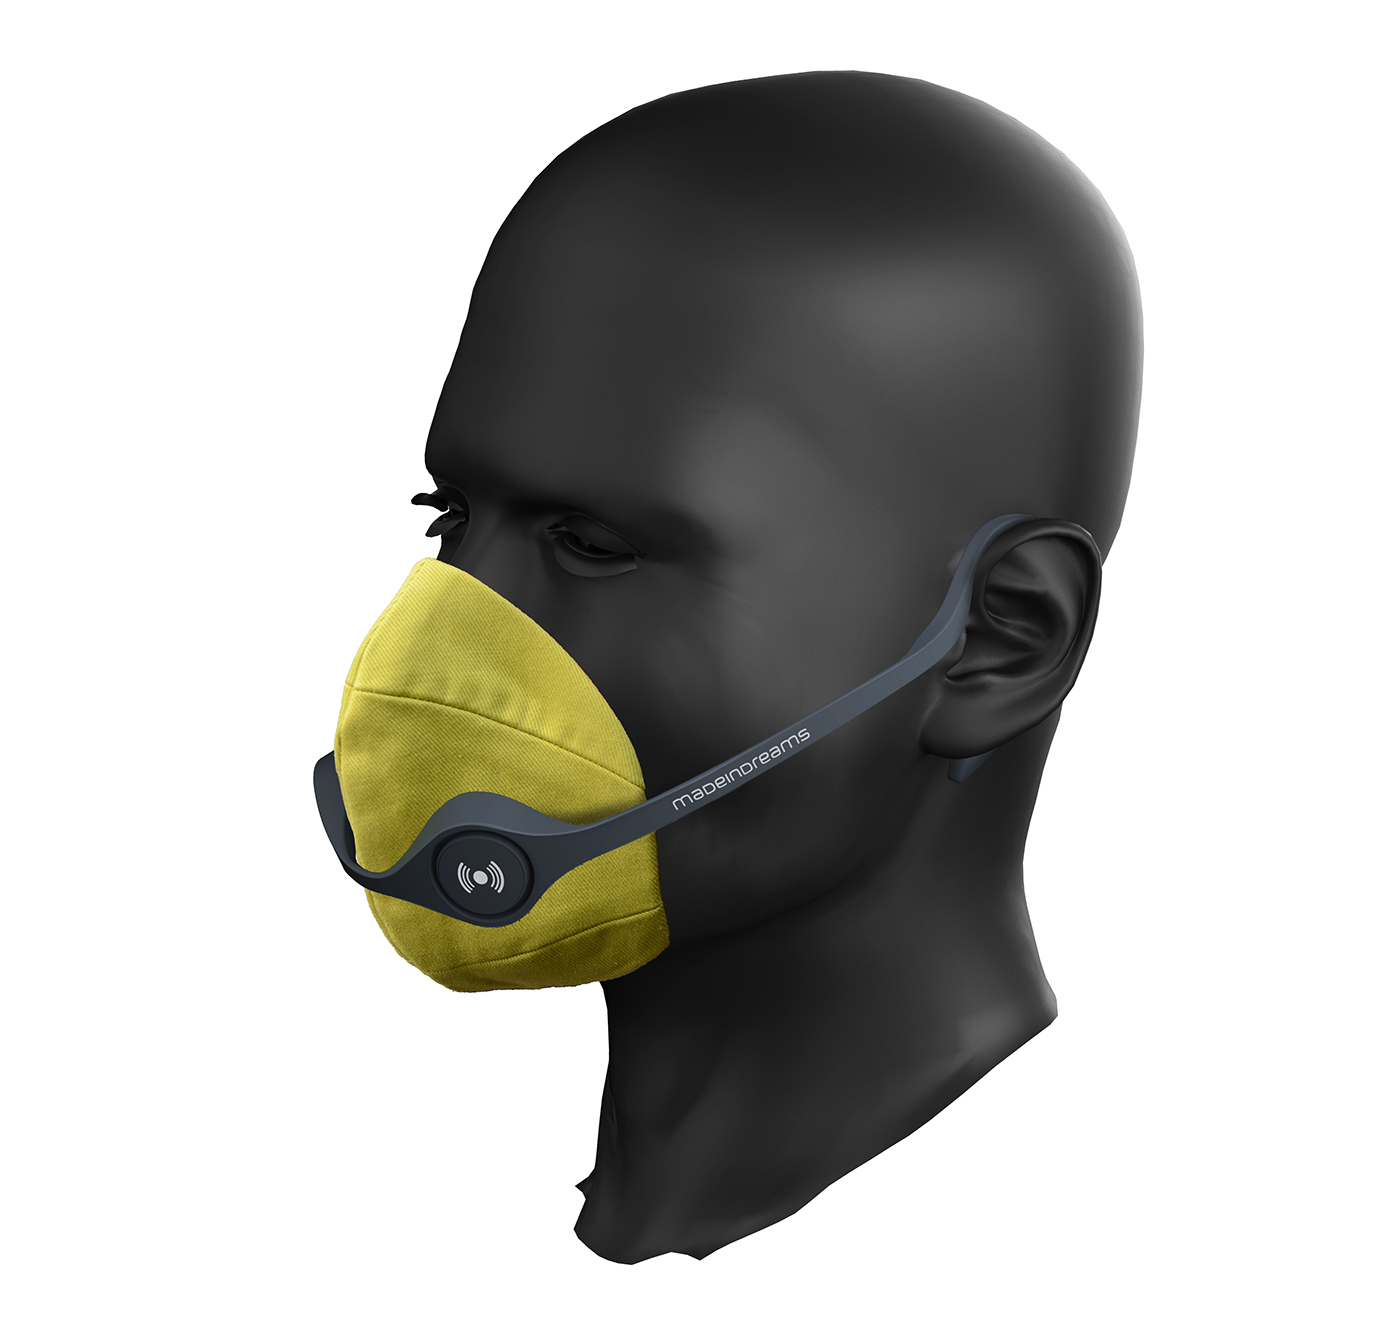 pollution filter mask application breath product service system Monitoring air pollution system  filtration system Pollution control safety Safety Gear protective clothing PPE